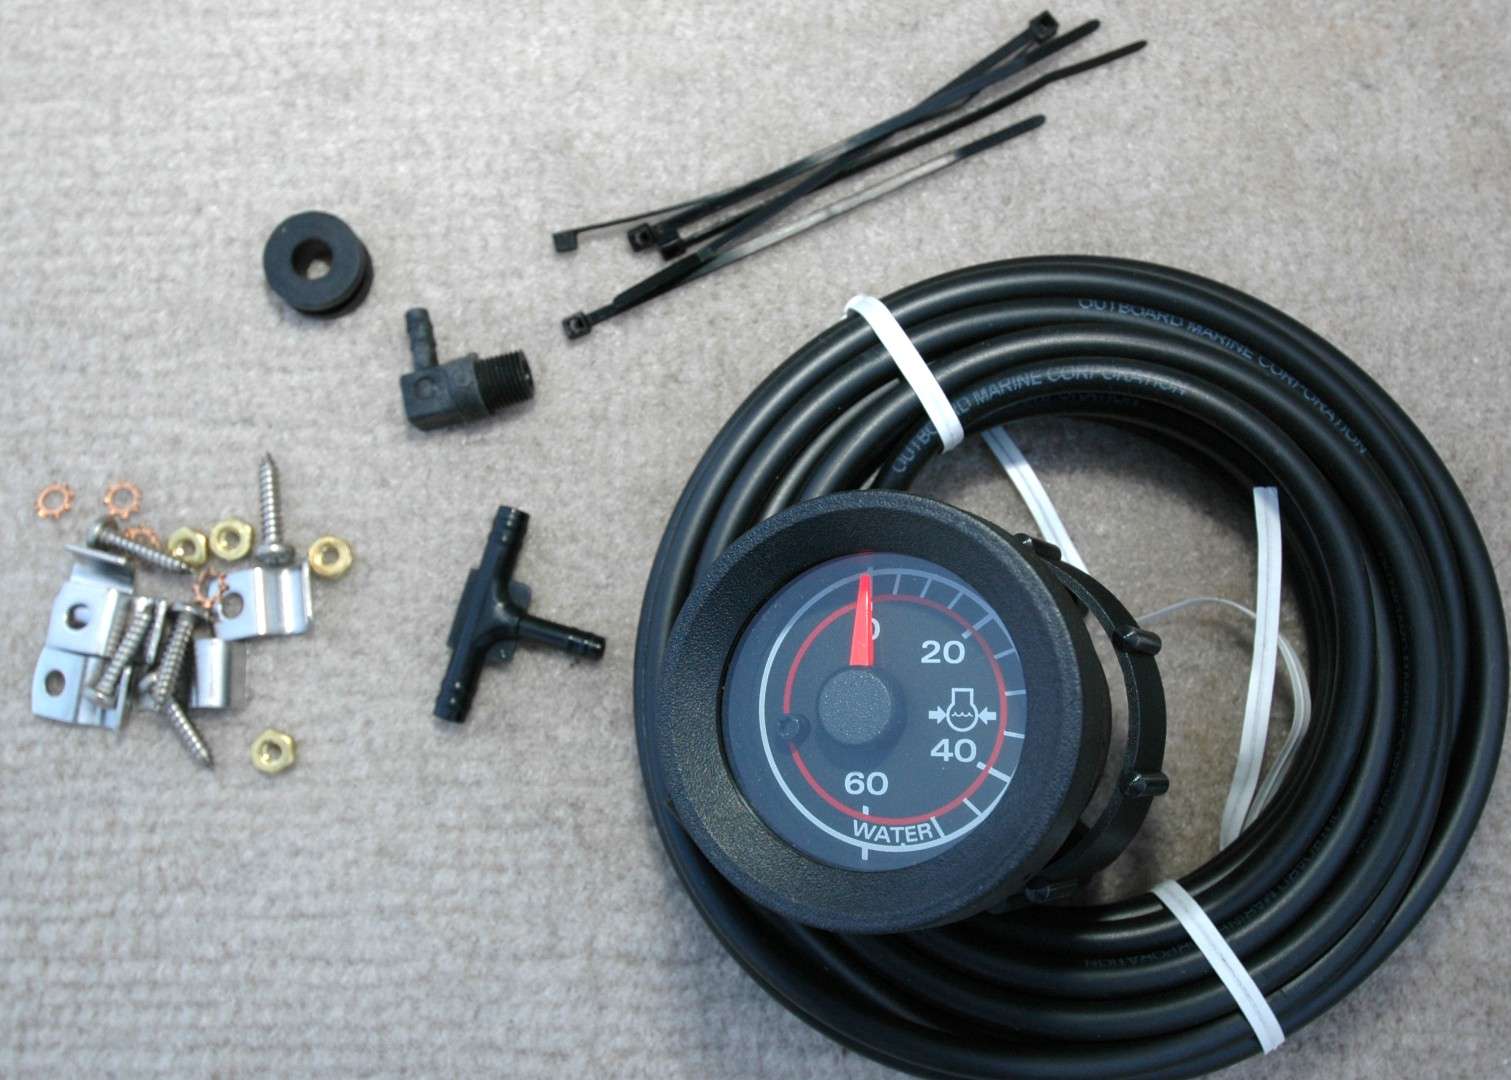 <em>INSTALLING A WATER PRESSURE GAUGE</em>
<br>Next up, every bass boat should have a water pressure gauge. It tells you when the water pressure is low before any alarms go off. You can buy a water pressure gauge kit that includes everything needed for installation.